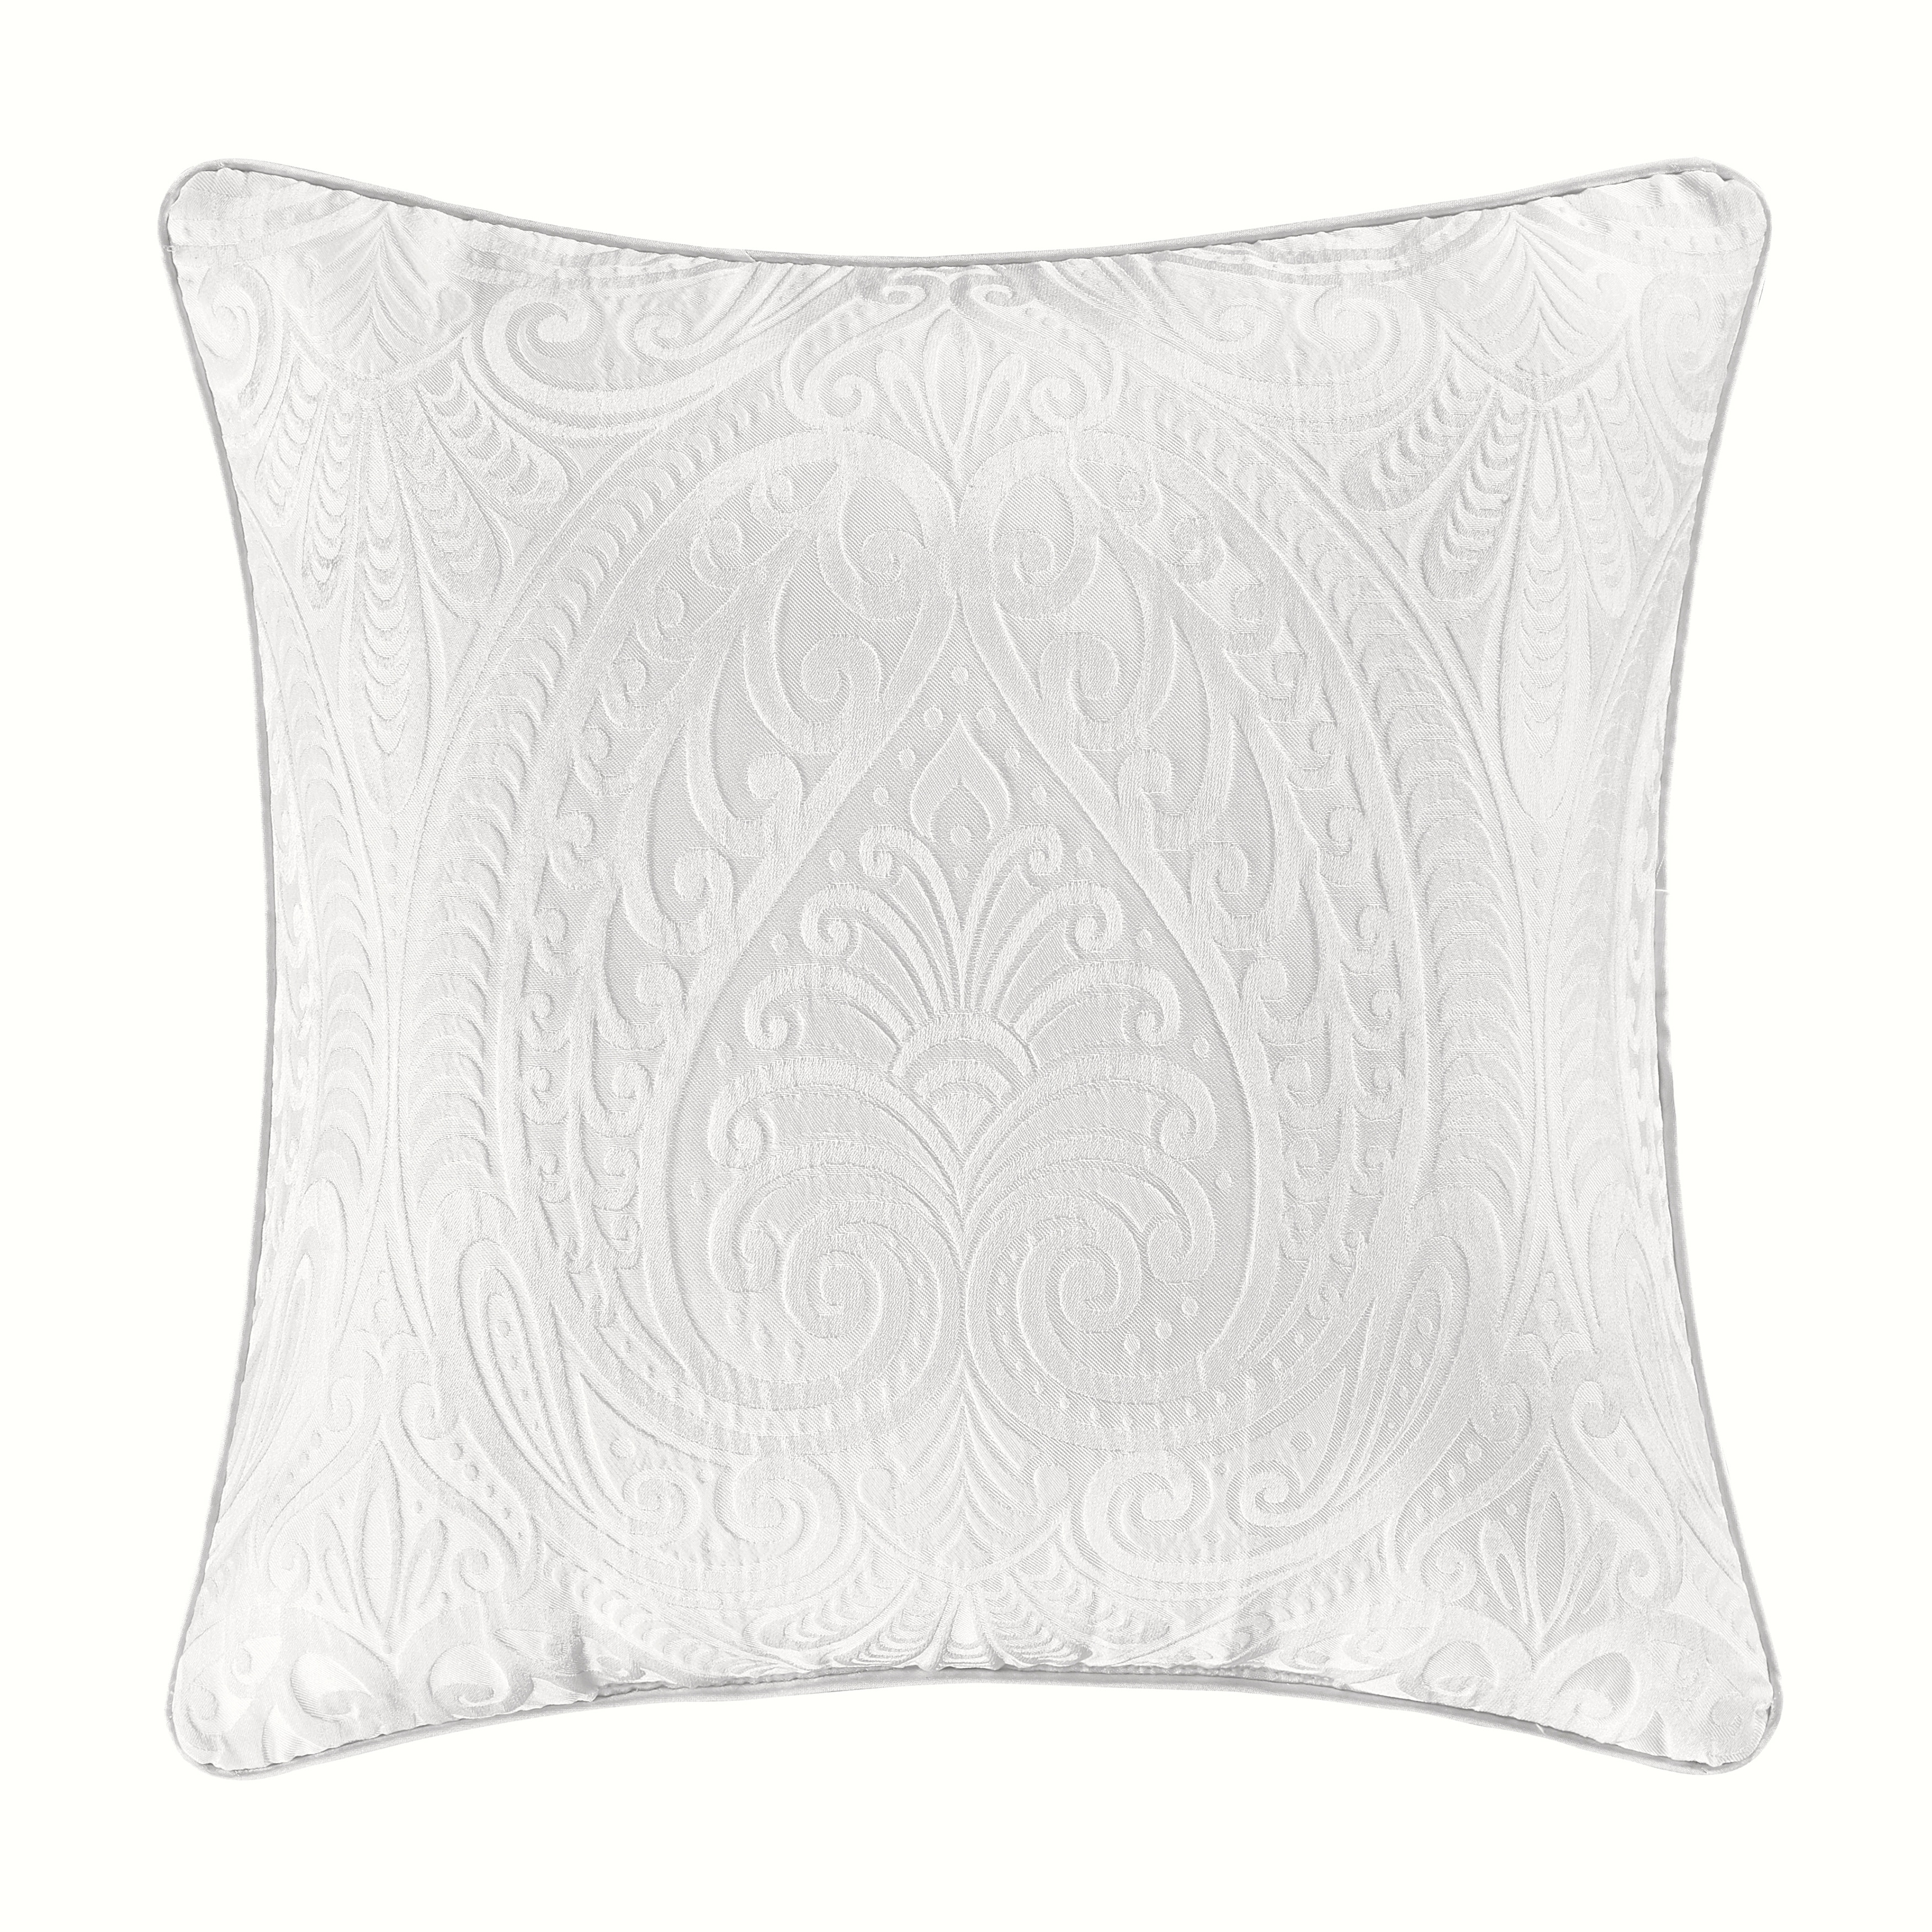 https://ak1.ostkcdn.com/images/products/is/images/direct/e0b2038e29c34987ded4506bfeac1217acd66ab7/Five-Queens-Court-Belize-20-Inch-Square-Decorative-Throw-Pillow.jpg